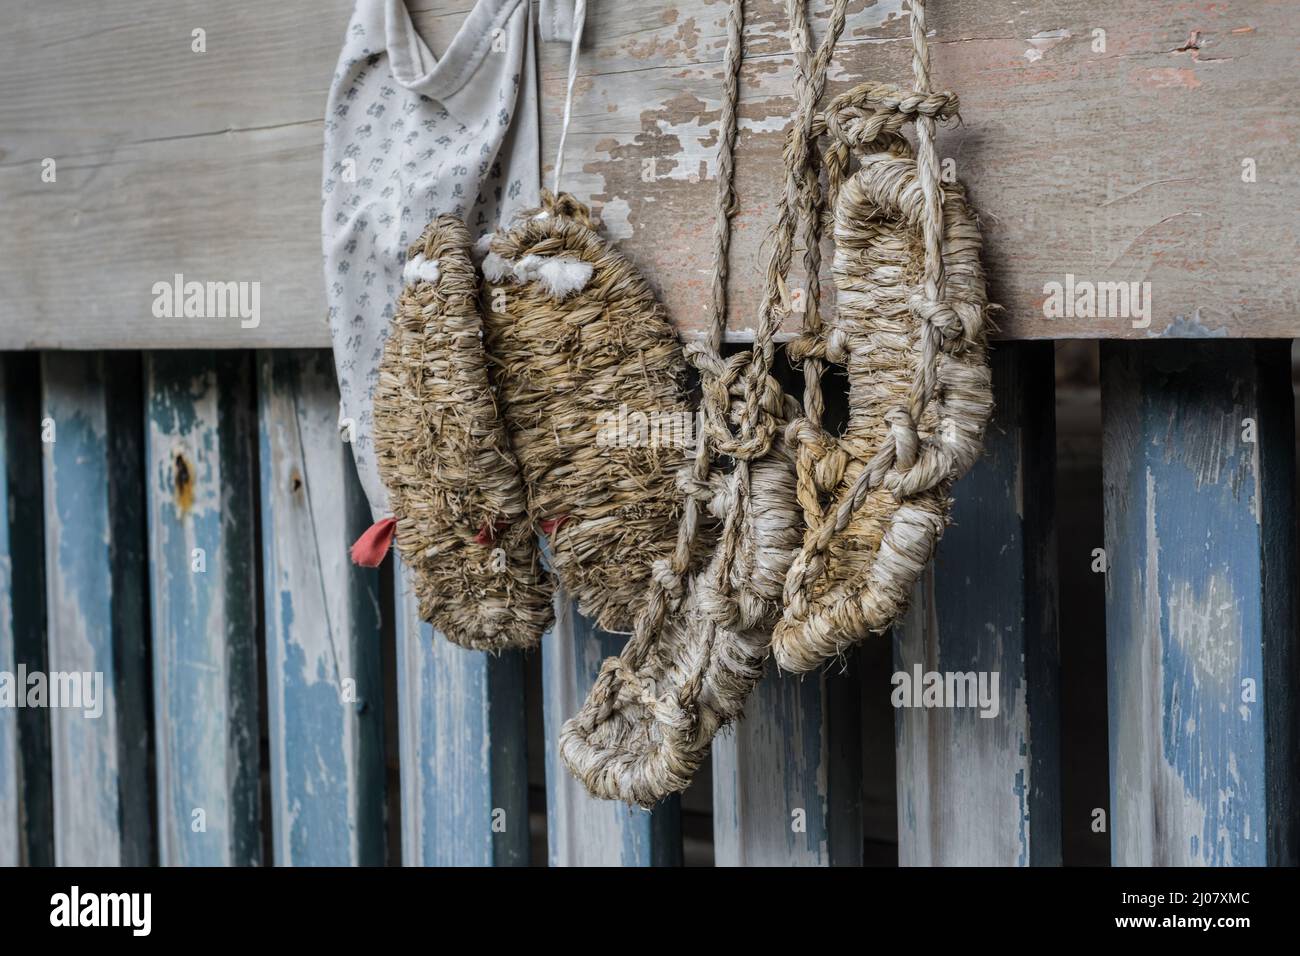 Traditional Japanese waraji or tie-on woven sandals made of rice straw hanging in a temple in Kyoto, Japan Stock Photo